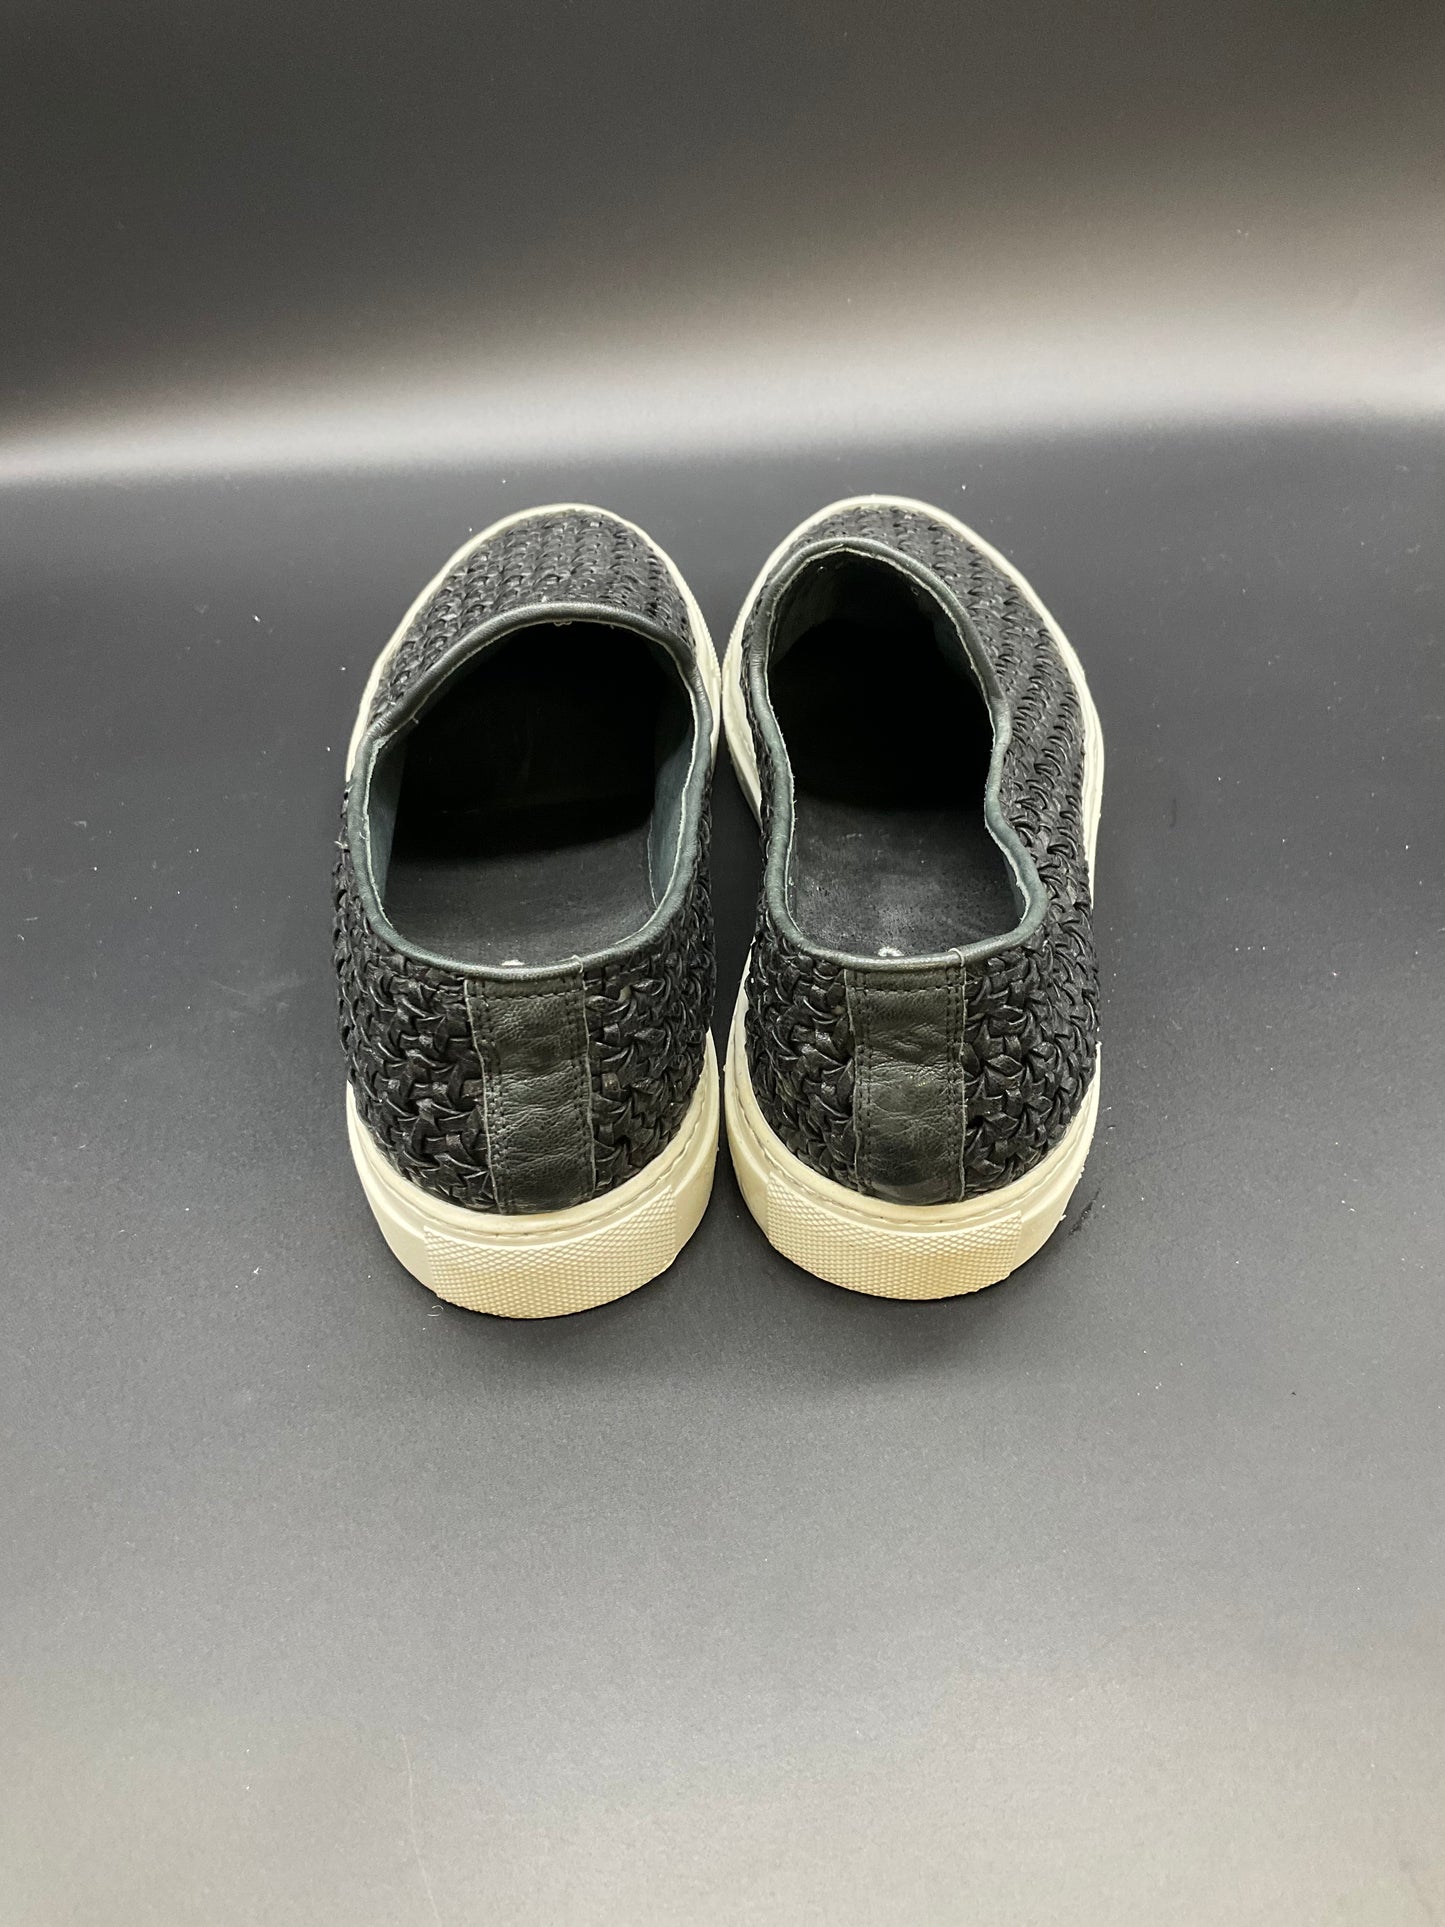 Rocco P Black Slip On Sneakers Size 40